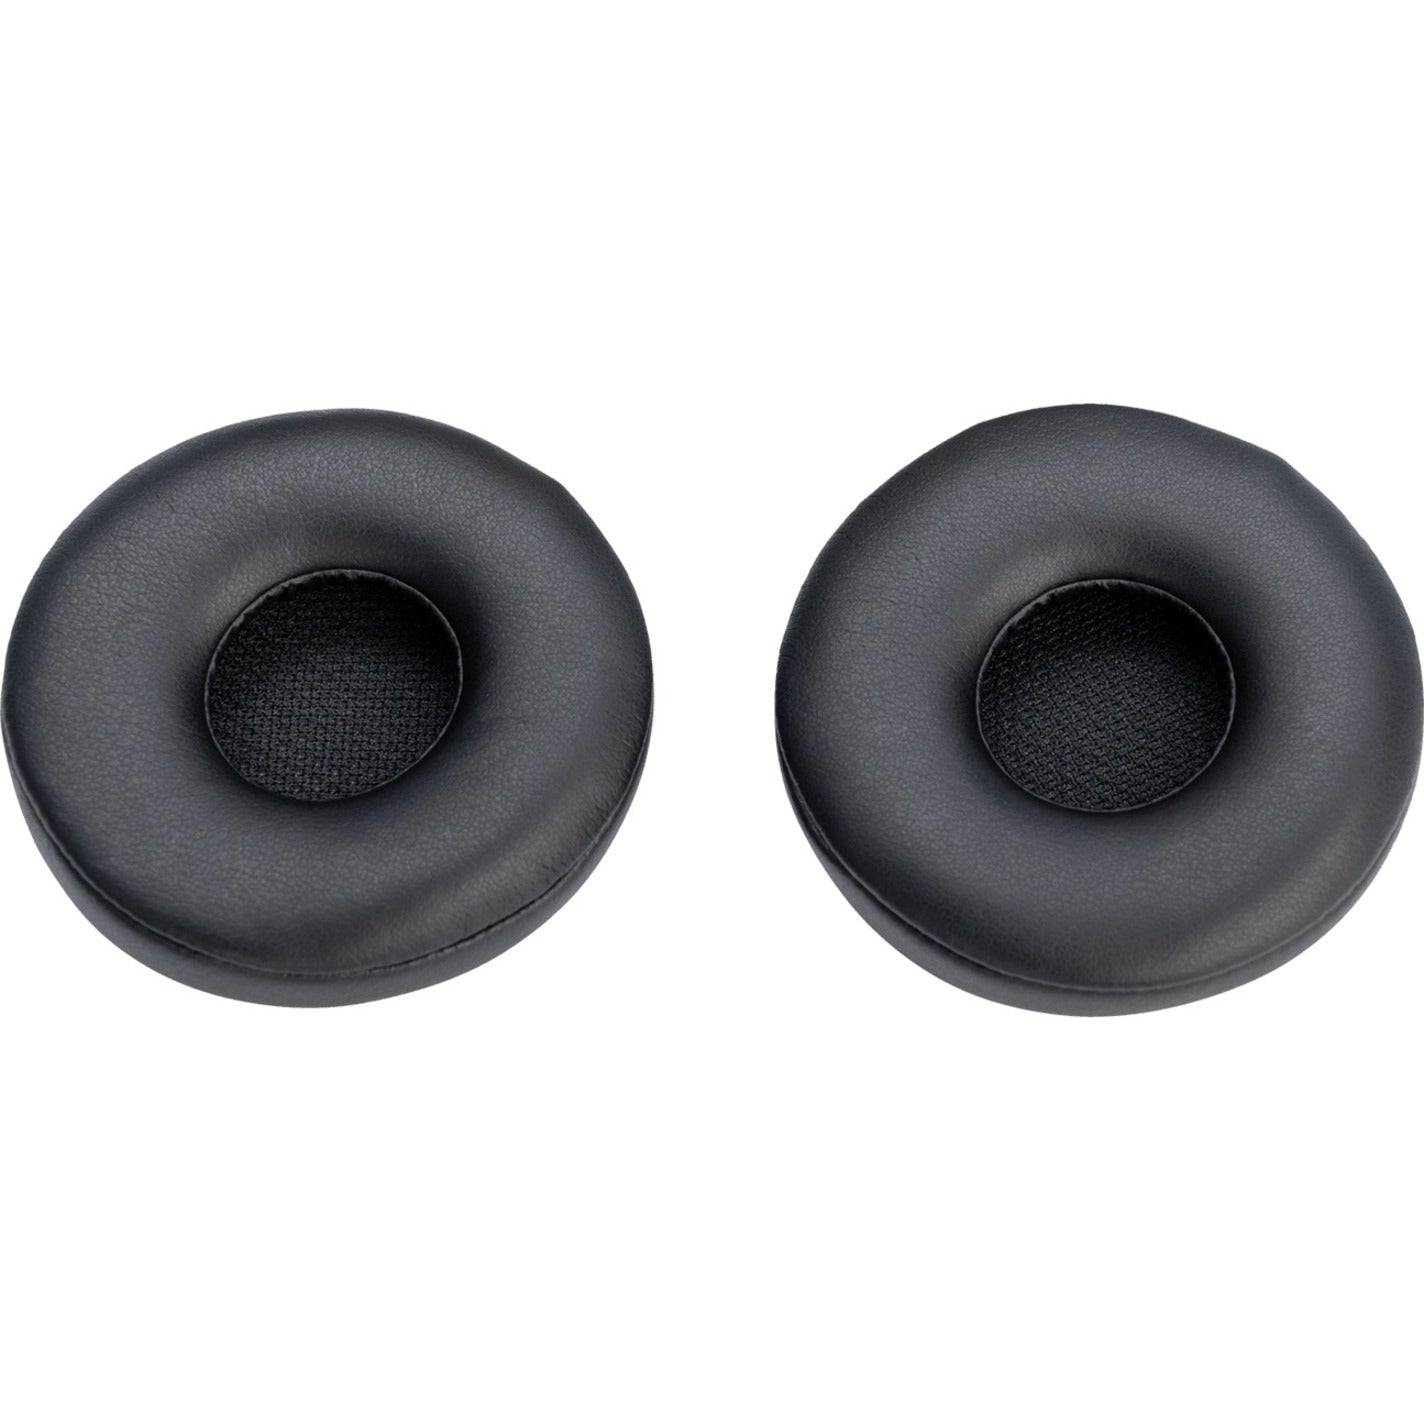 Jabra 14101-71 Engage 50 Ear Cushions, 2 pcs - Comfortable Replacement Pads for Jabra Engage 50 Headset